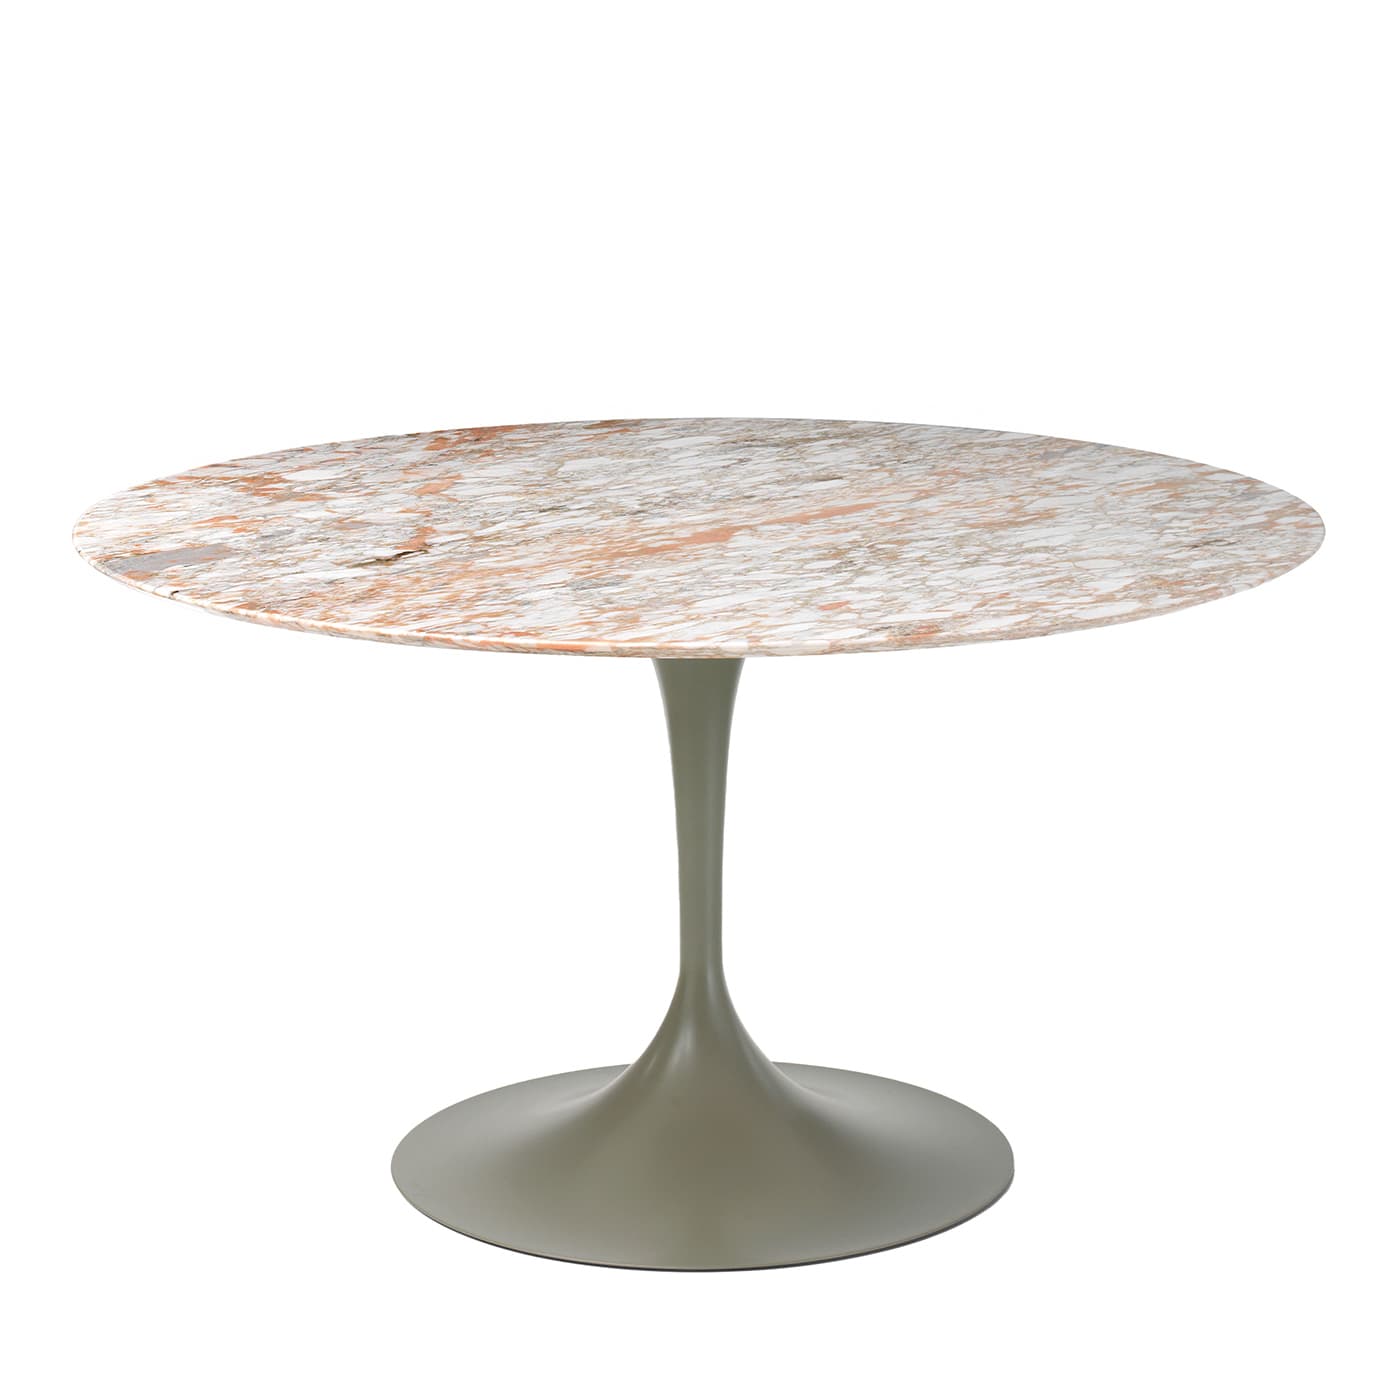 Itavolo Round Table with Marble Top - Sitia